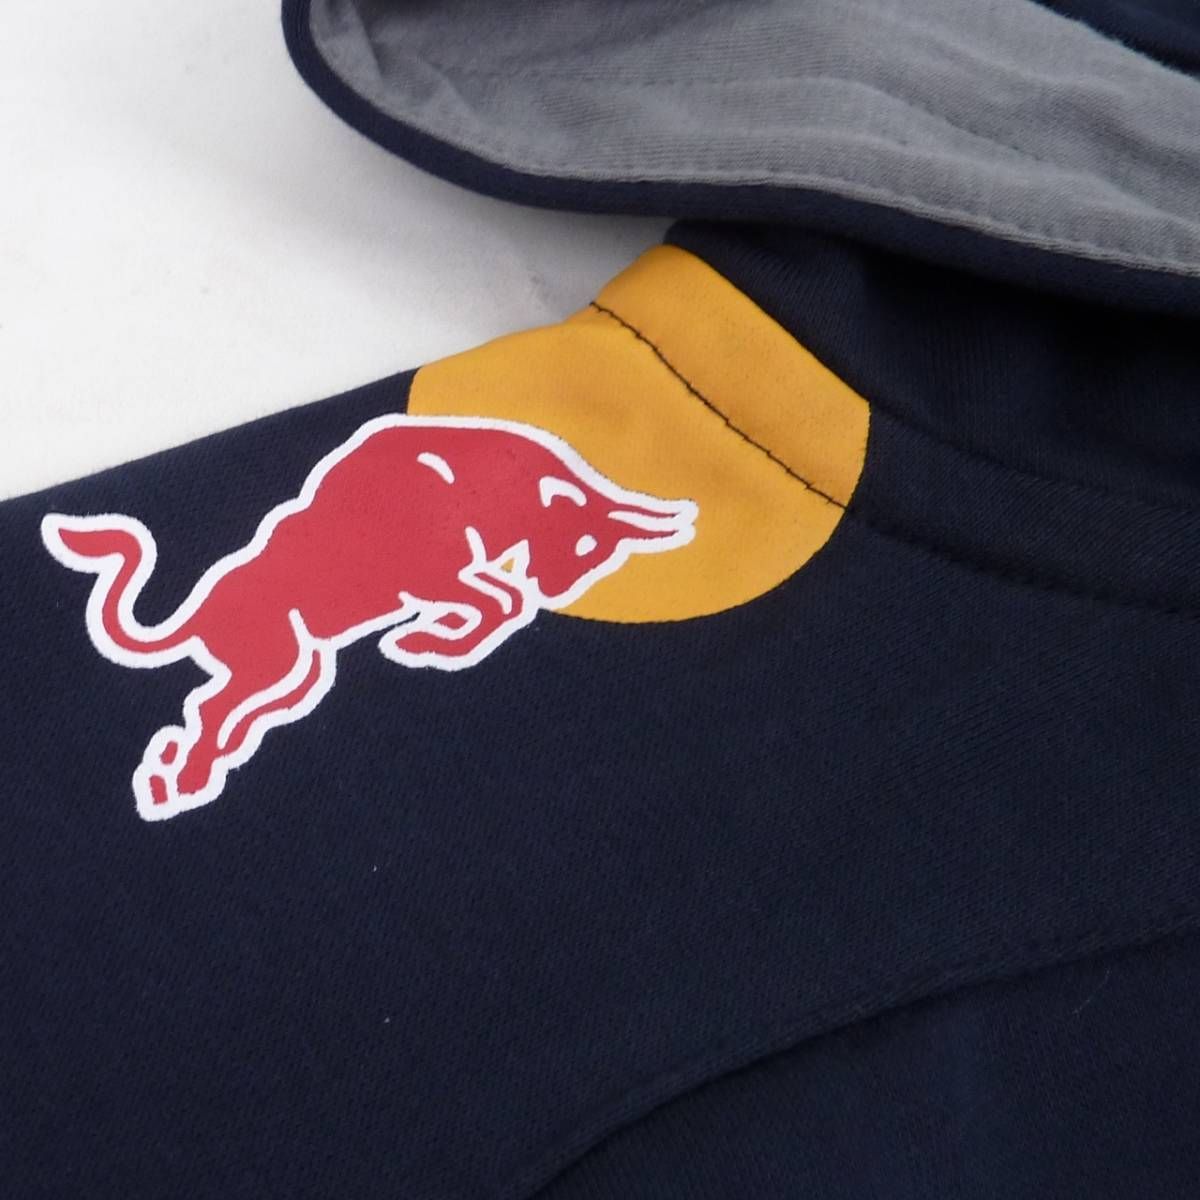 Pepe jeans Red bull キッズサイズ ジップアップパーカー - Enough